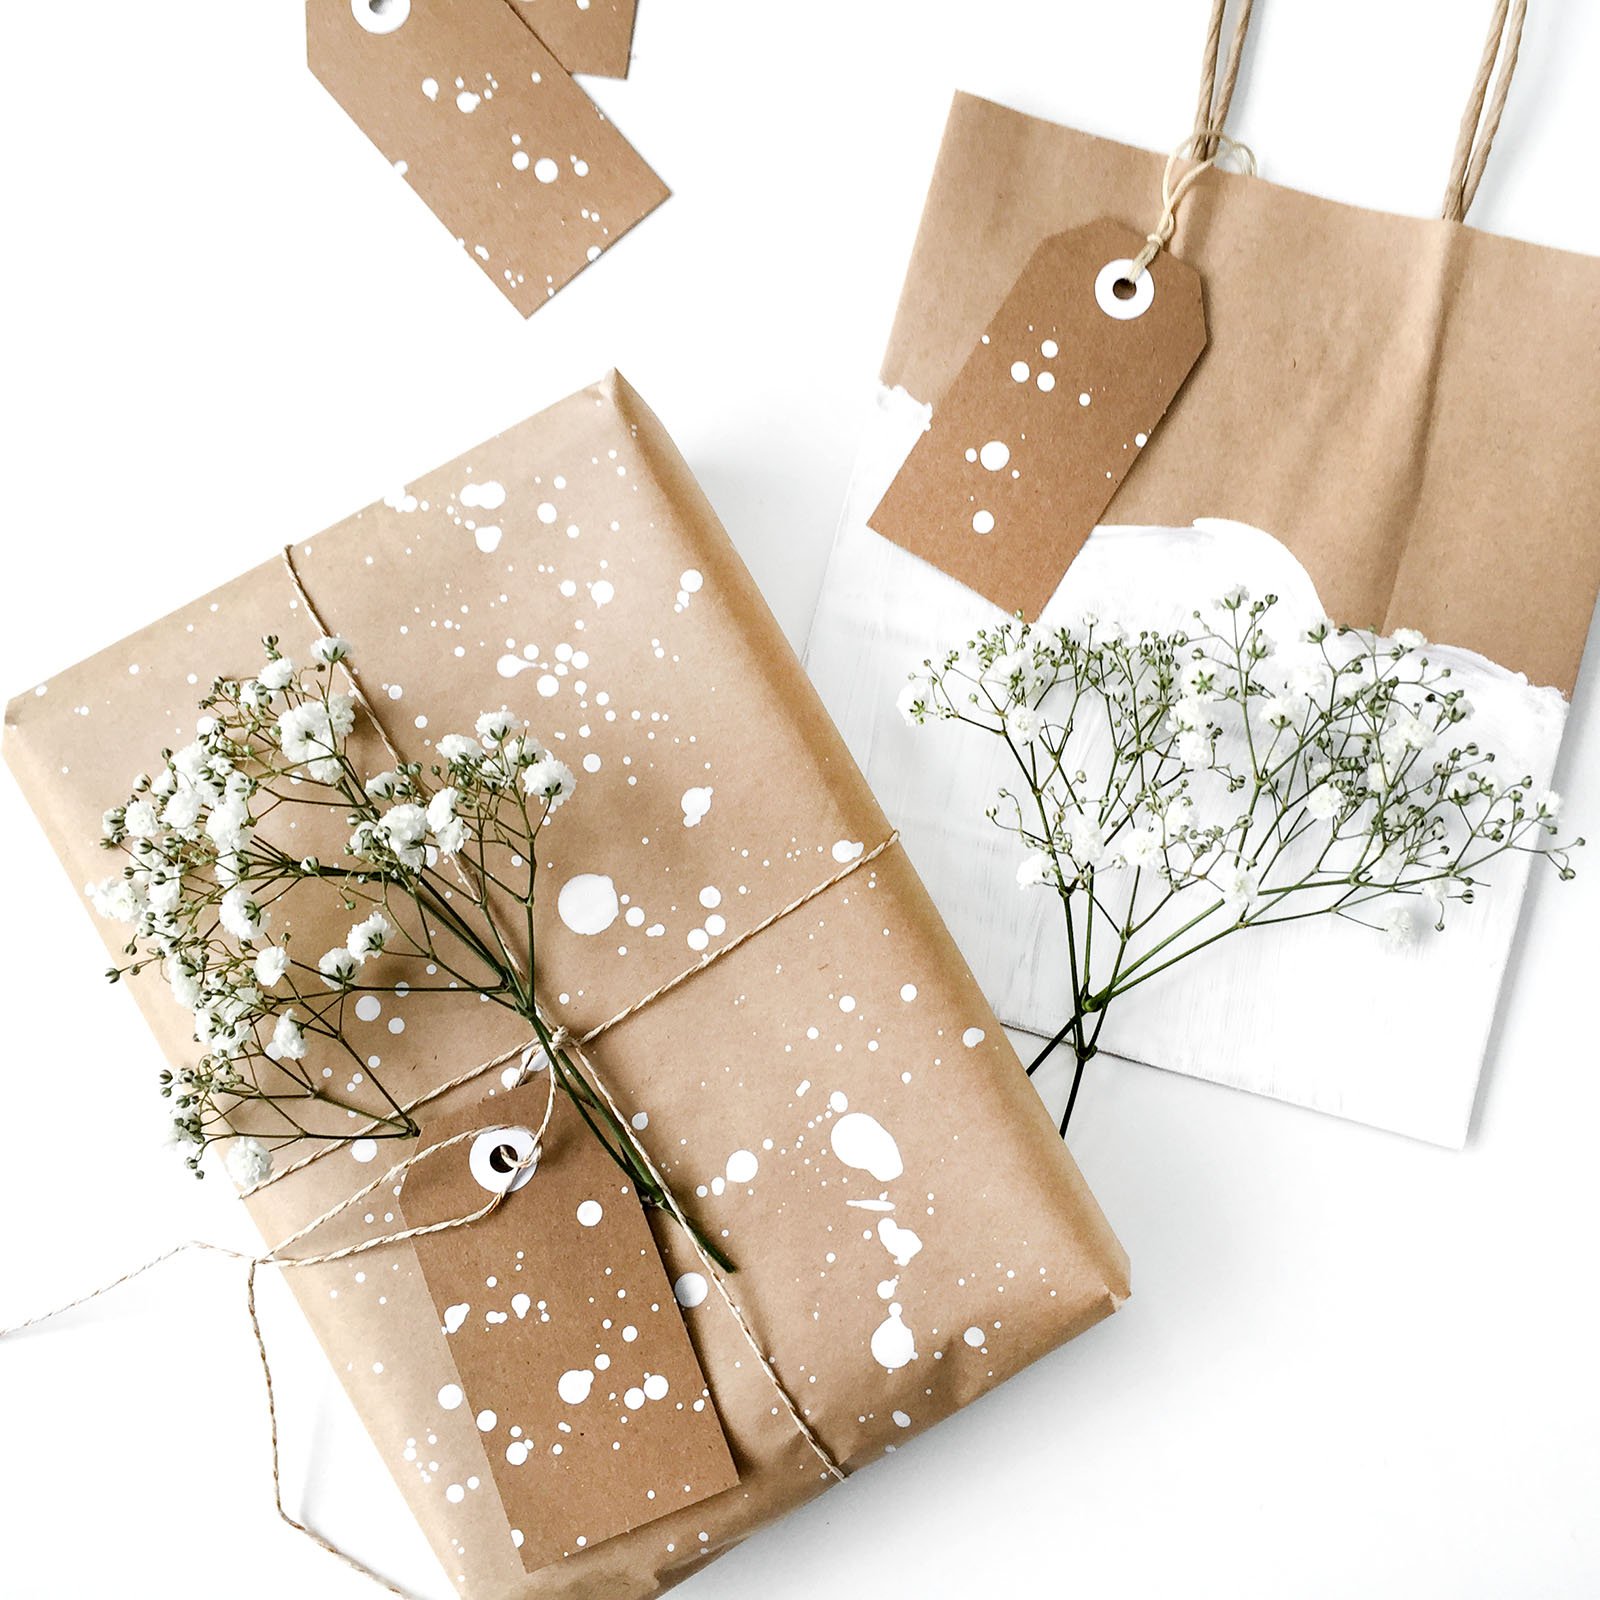 reusable wrapping paper made from brown craft paper and splattered white paint